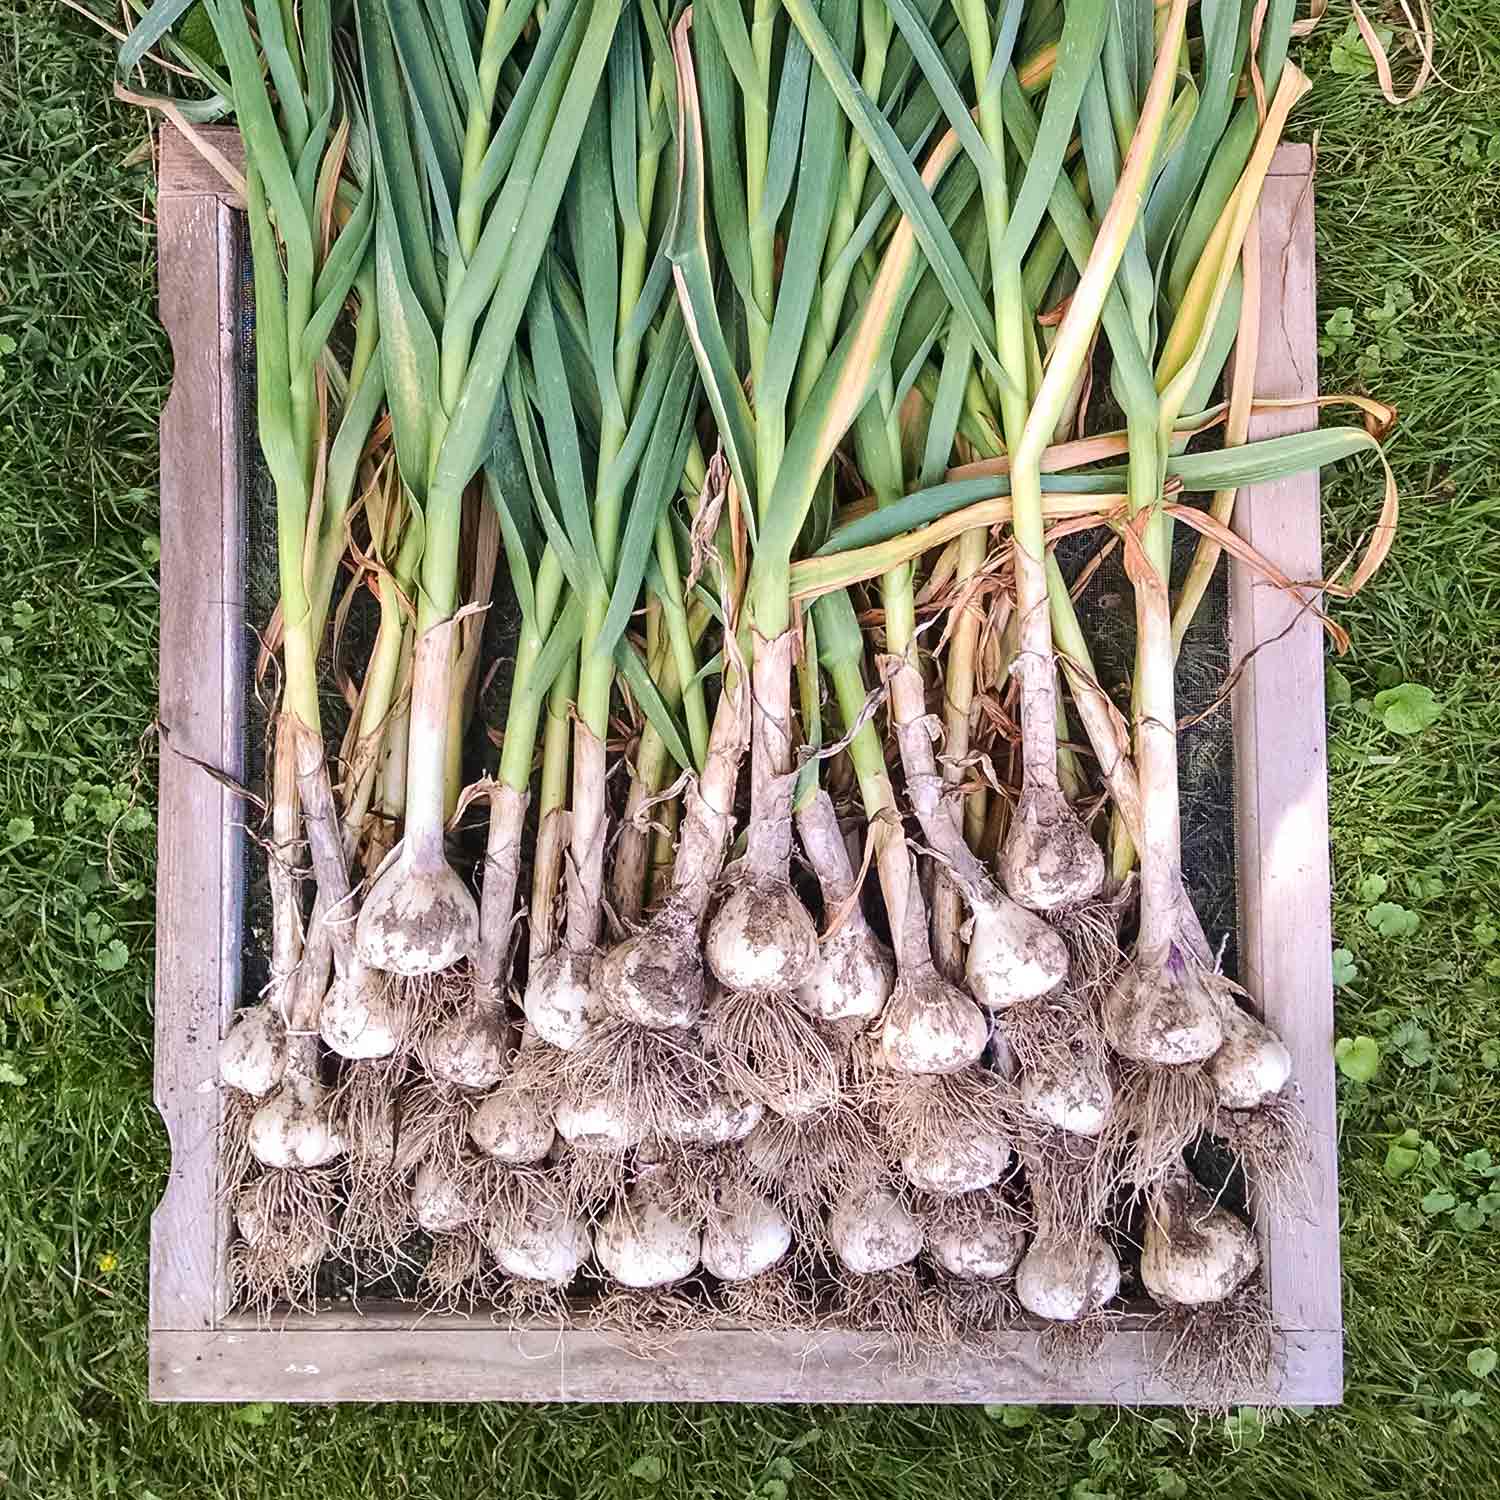 Garlic plants curing on an old window screen.